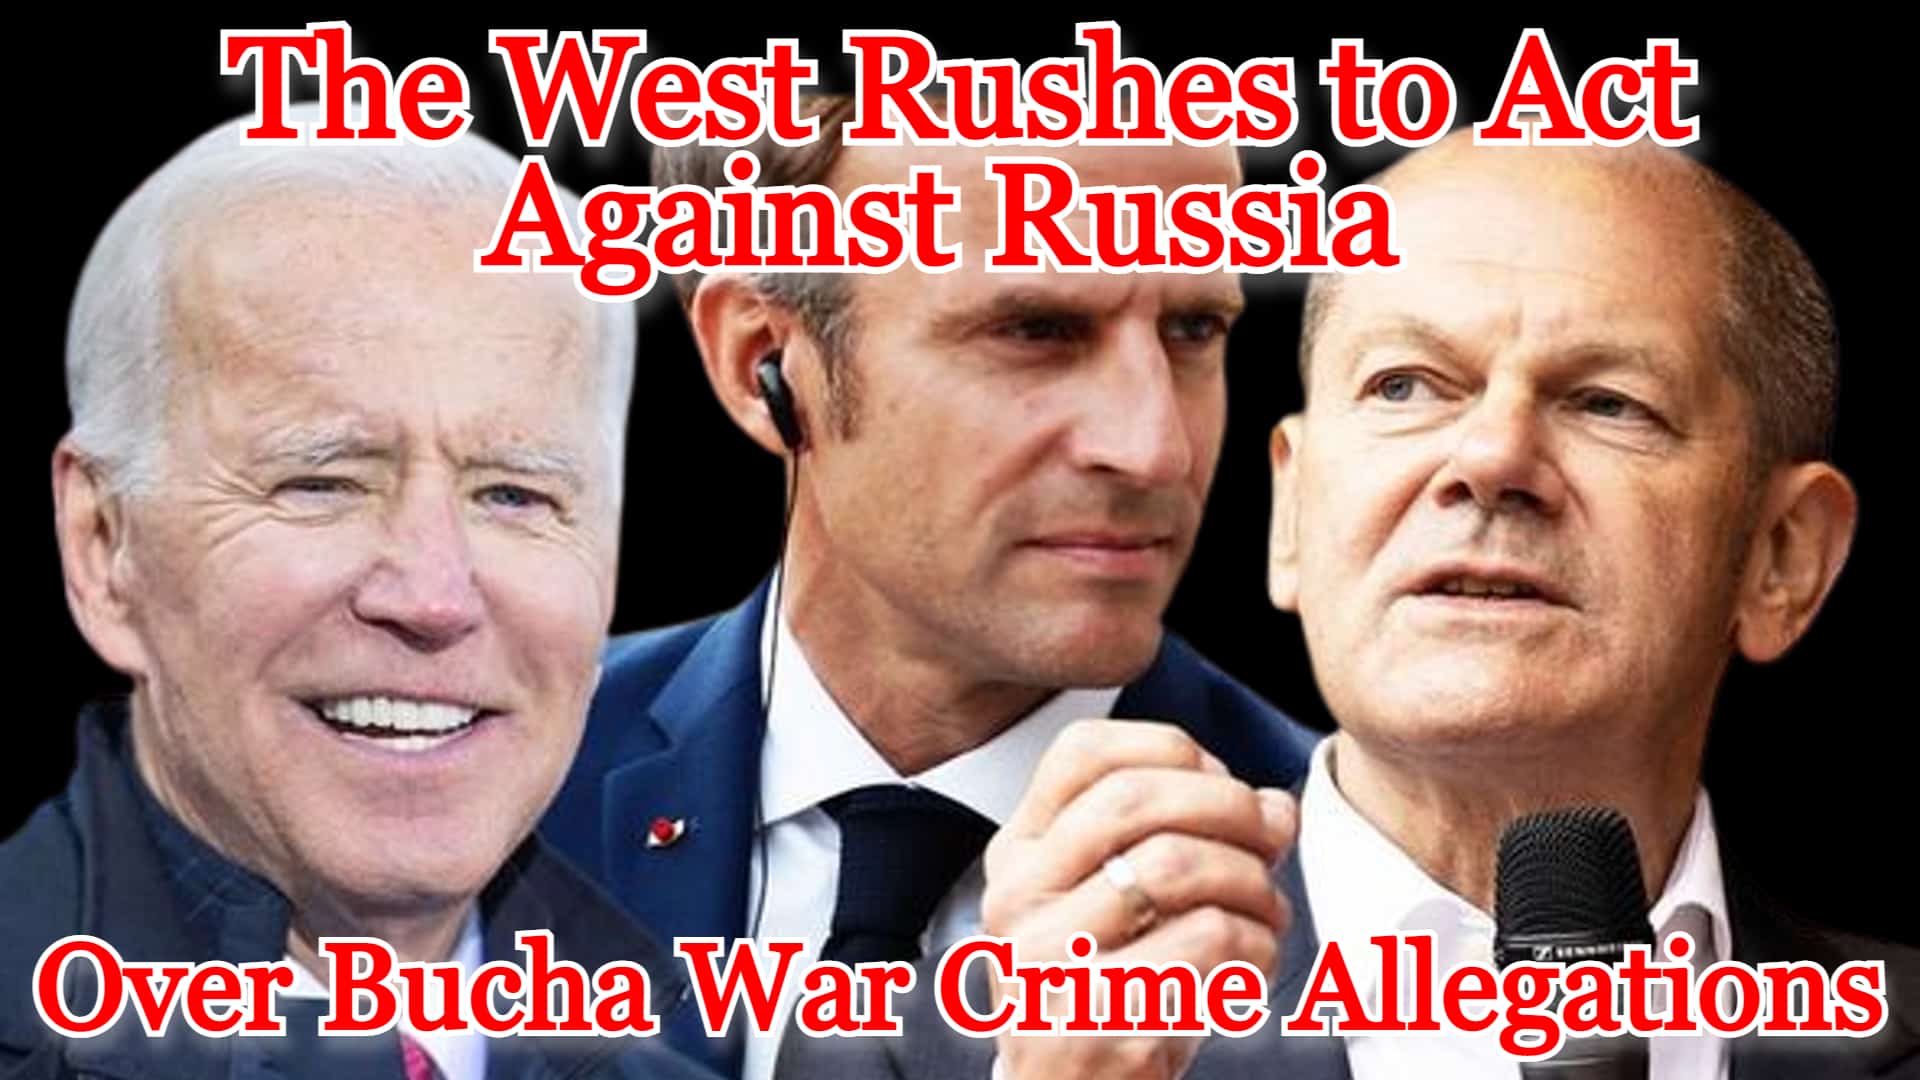 COI #258: The West Rushes to Act Against Russia Over Bucha War Crime Allegations